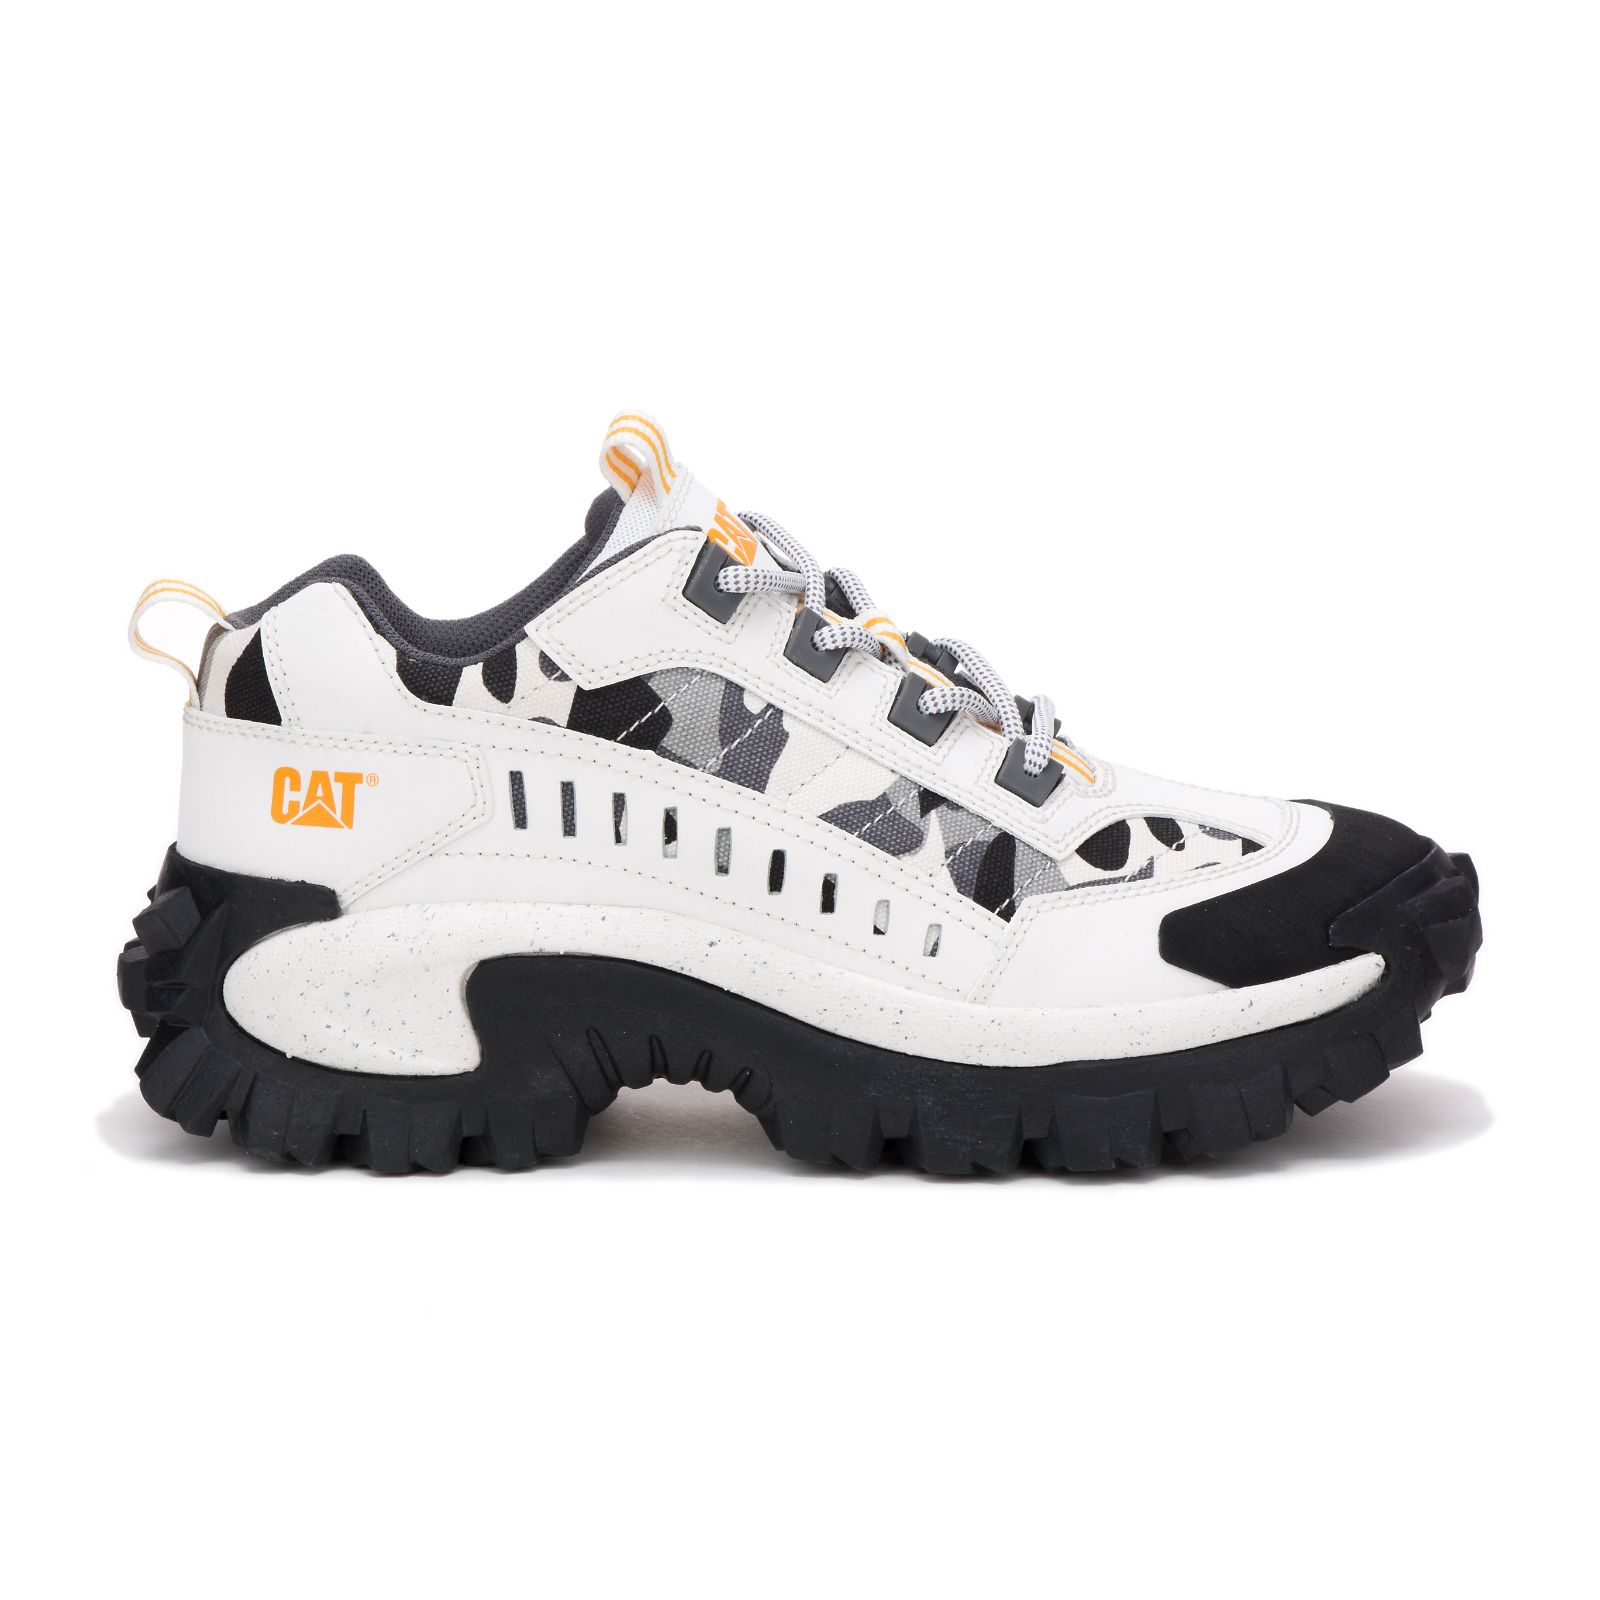 Caterpillar Shoes Lahore - Caterpillar Intruder Mens Casual Shoes White (508164-DSP)